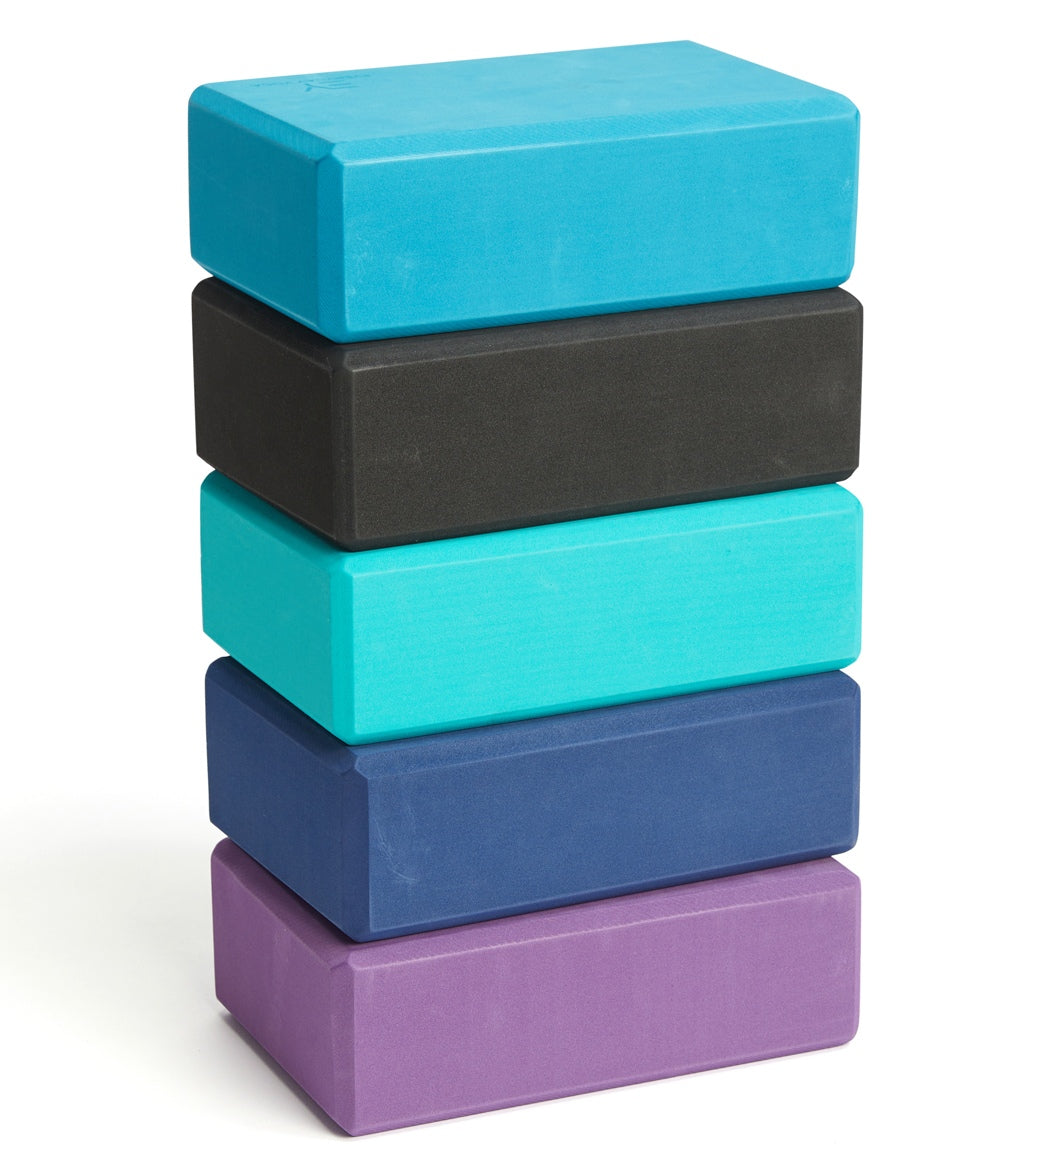 How to Use Yoga Blocks (From Beginner to Advanced)